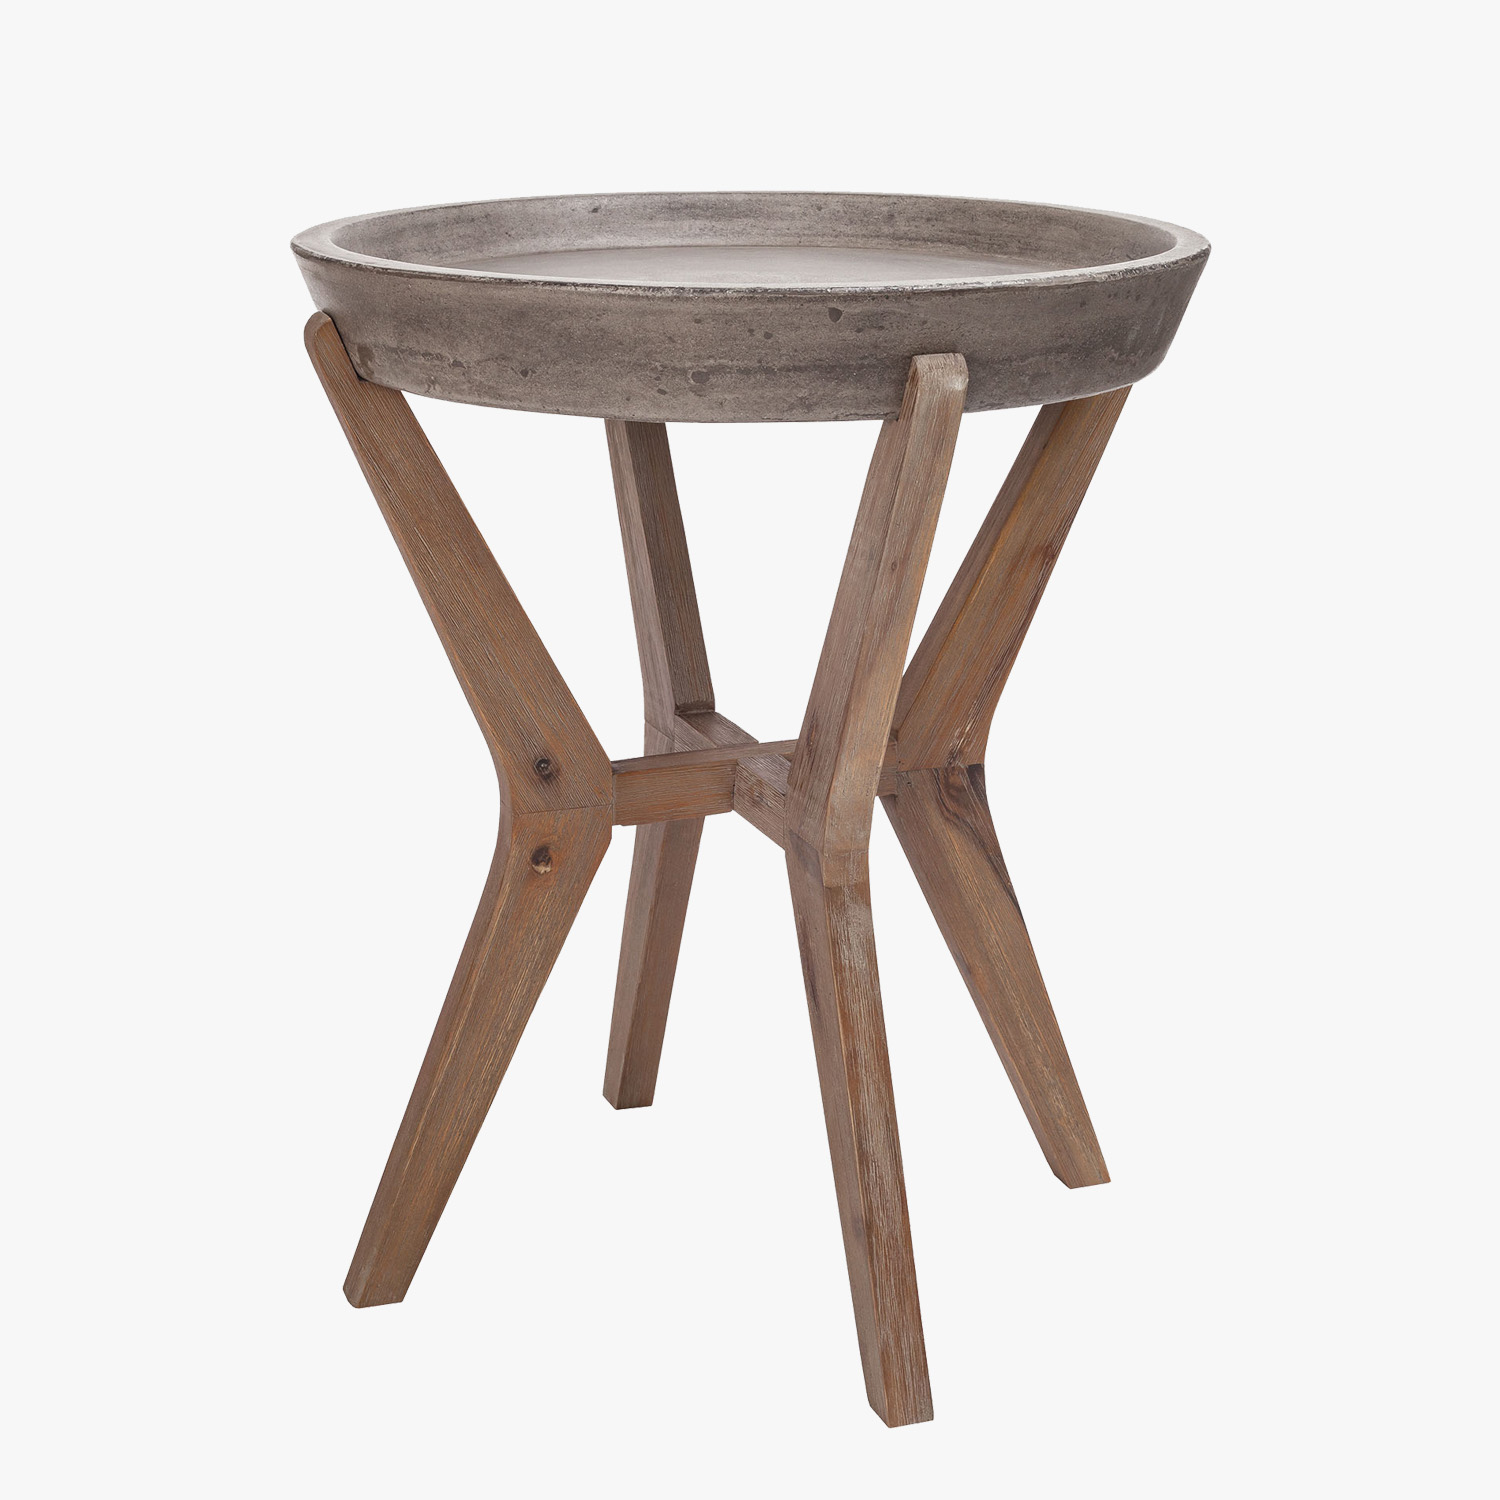 tulu concrete top side table accent tables dear keaton under tiny lamp inch wide console folding coffee target value furniture small skinny hampton bay patio chairs oak tiffany